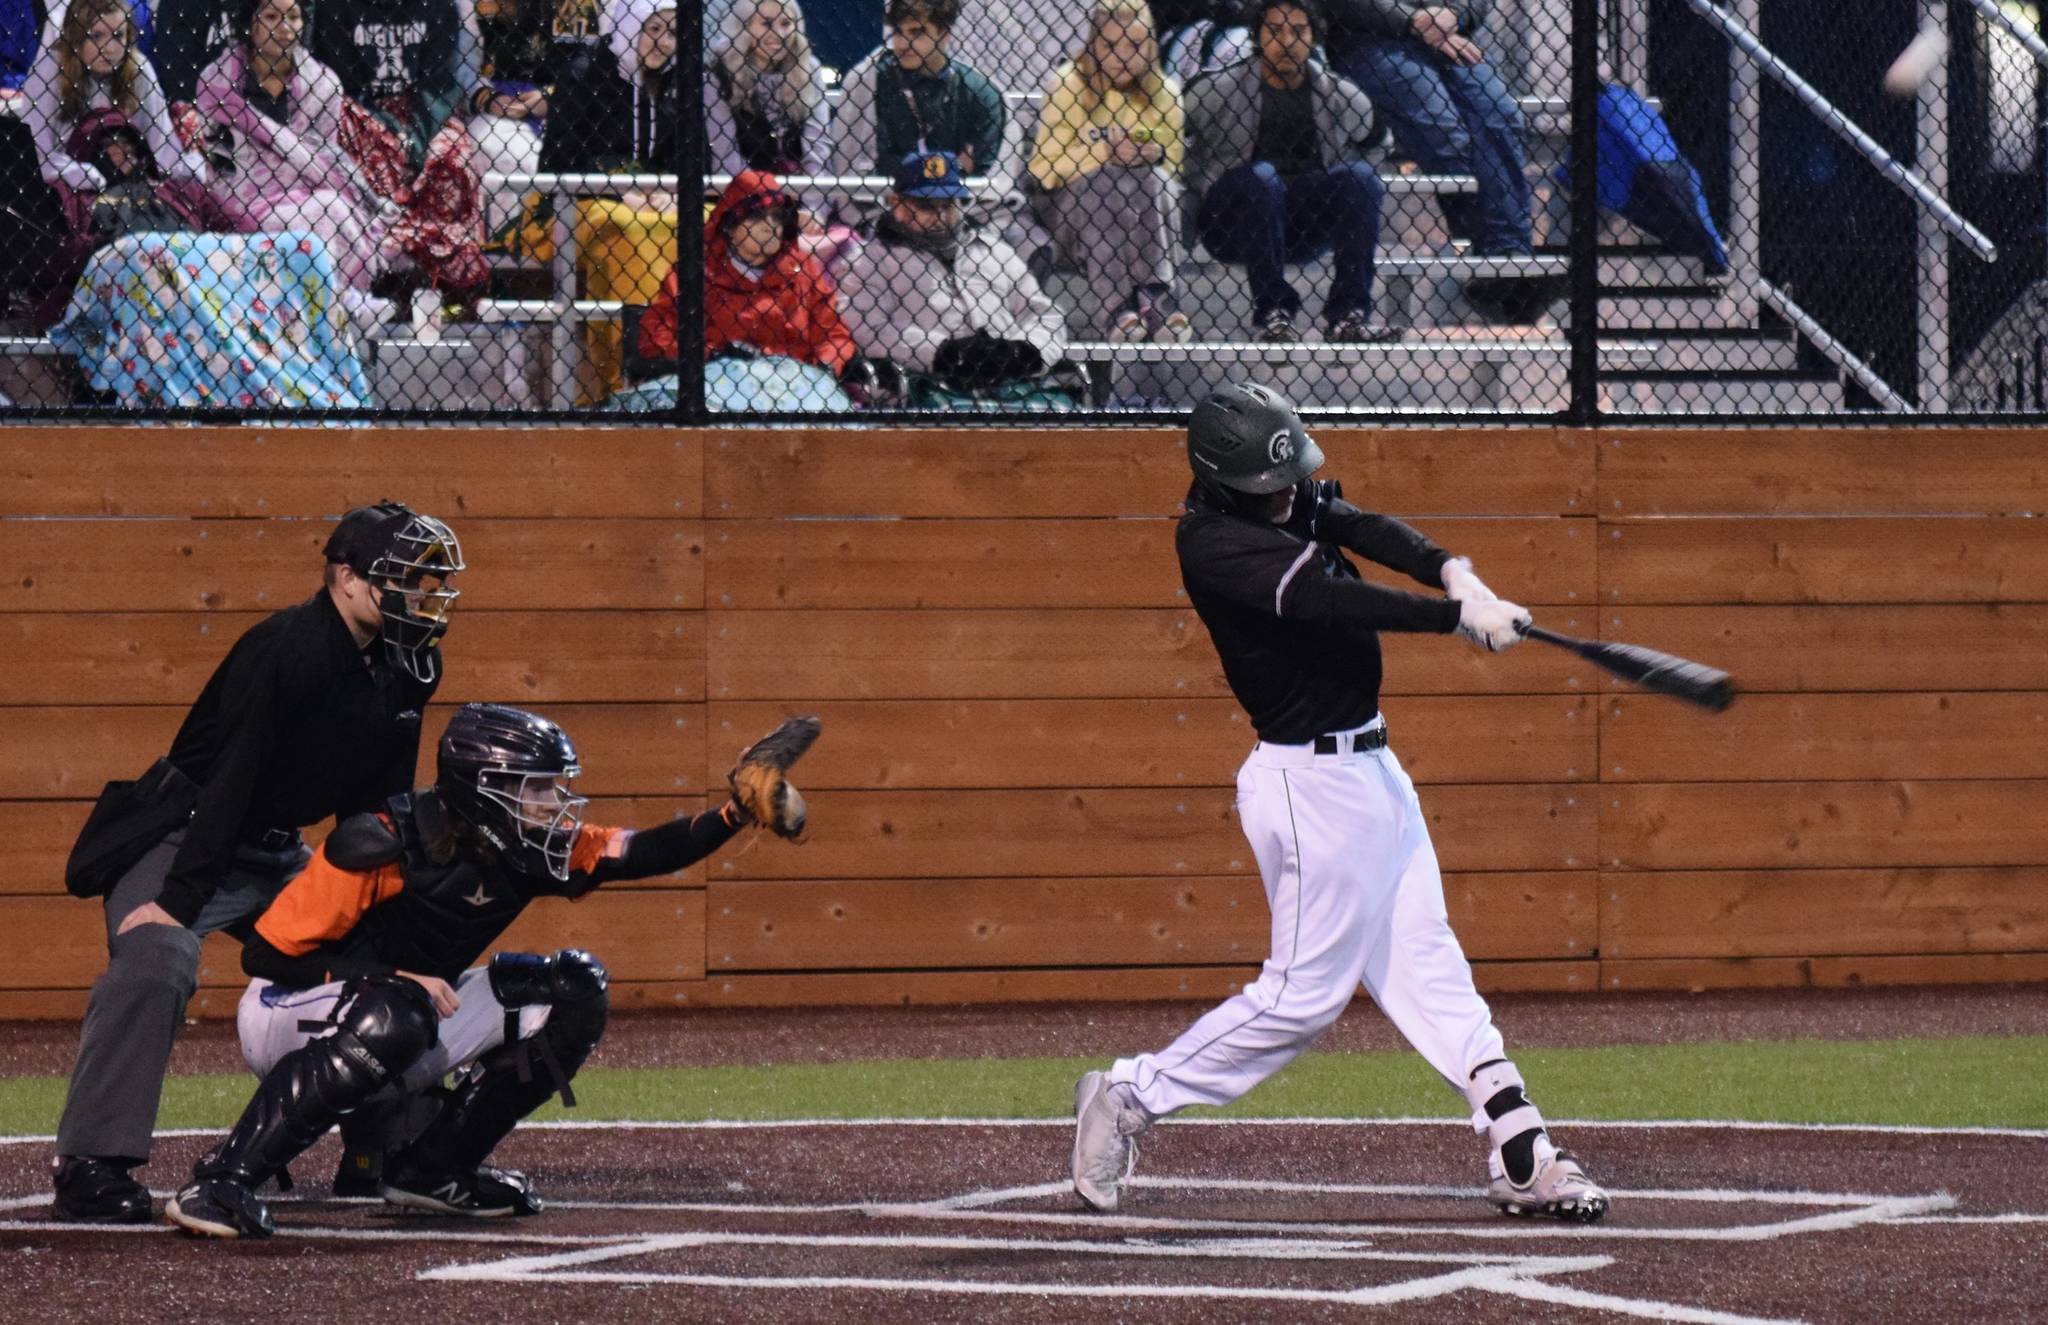 Auburn’s Evan Jilbert connects for a triple against Auburn Mountainview during NPSL Olympic play Monday night. Jilbert also doubled for the Trojans in their 9-8 win. RACHEL CIAMPI, Auburn Reporter